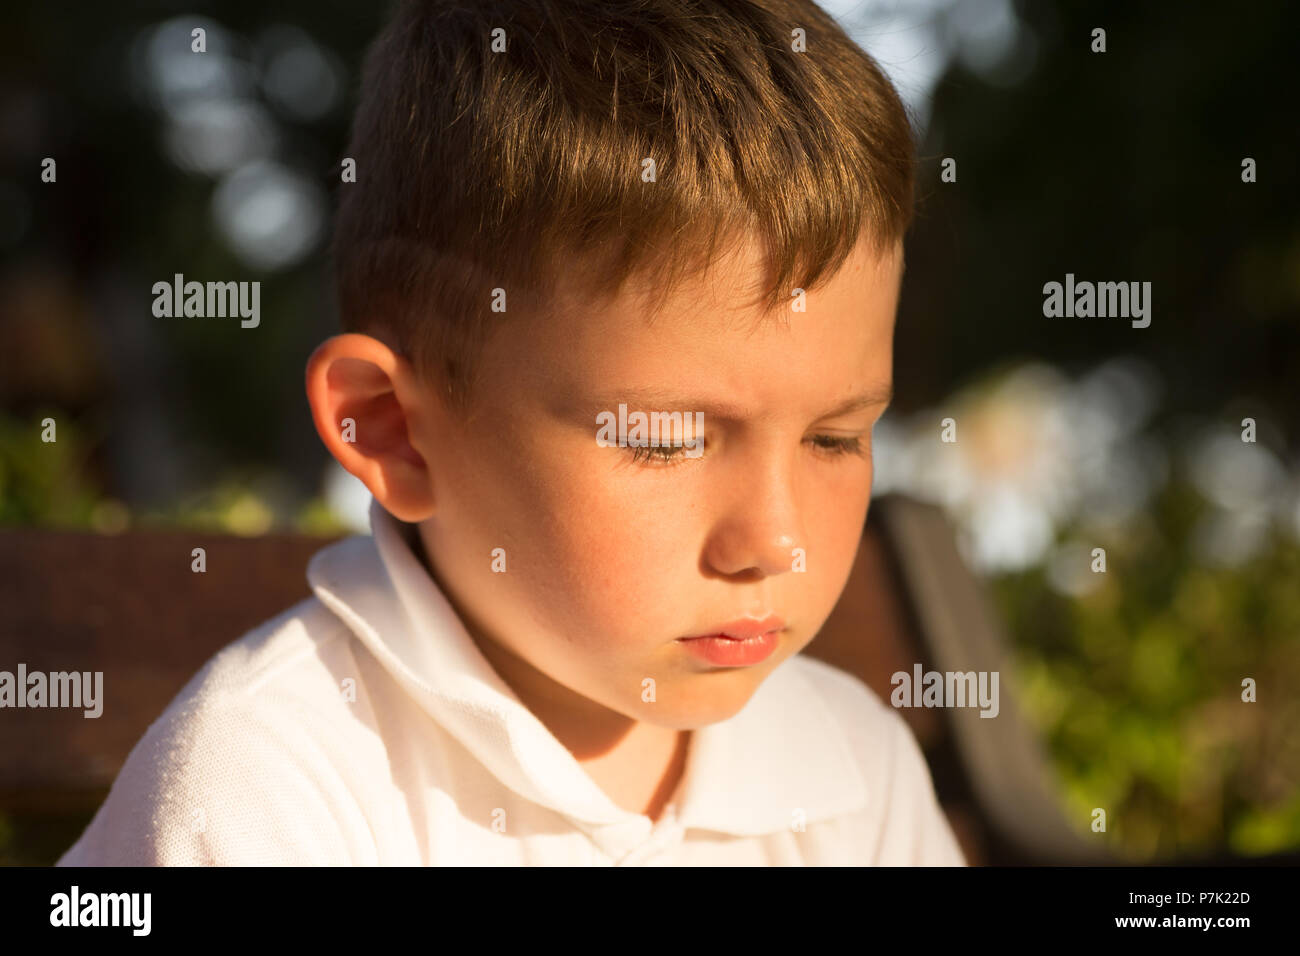 Beautiful little brunet hair boy, has serious face, happy eyes. Child portrait. Summer time. Close up. Stock Photo